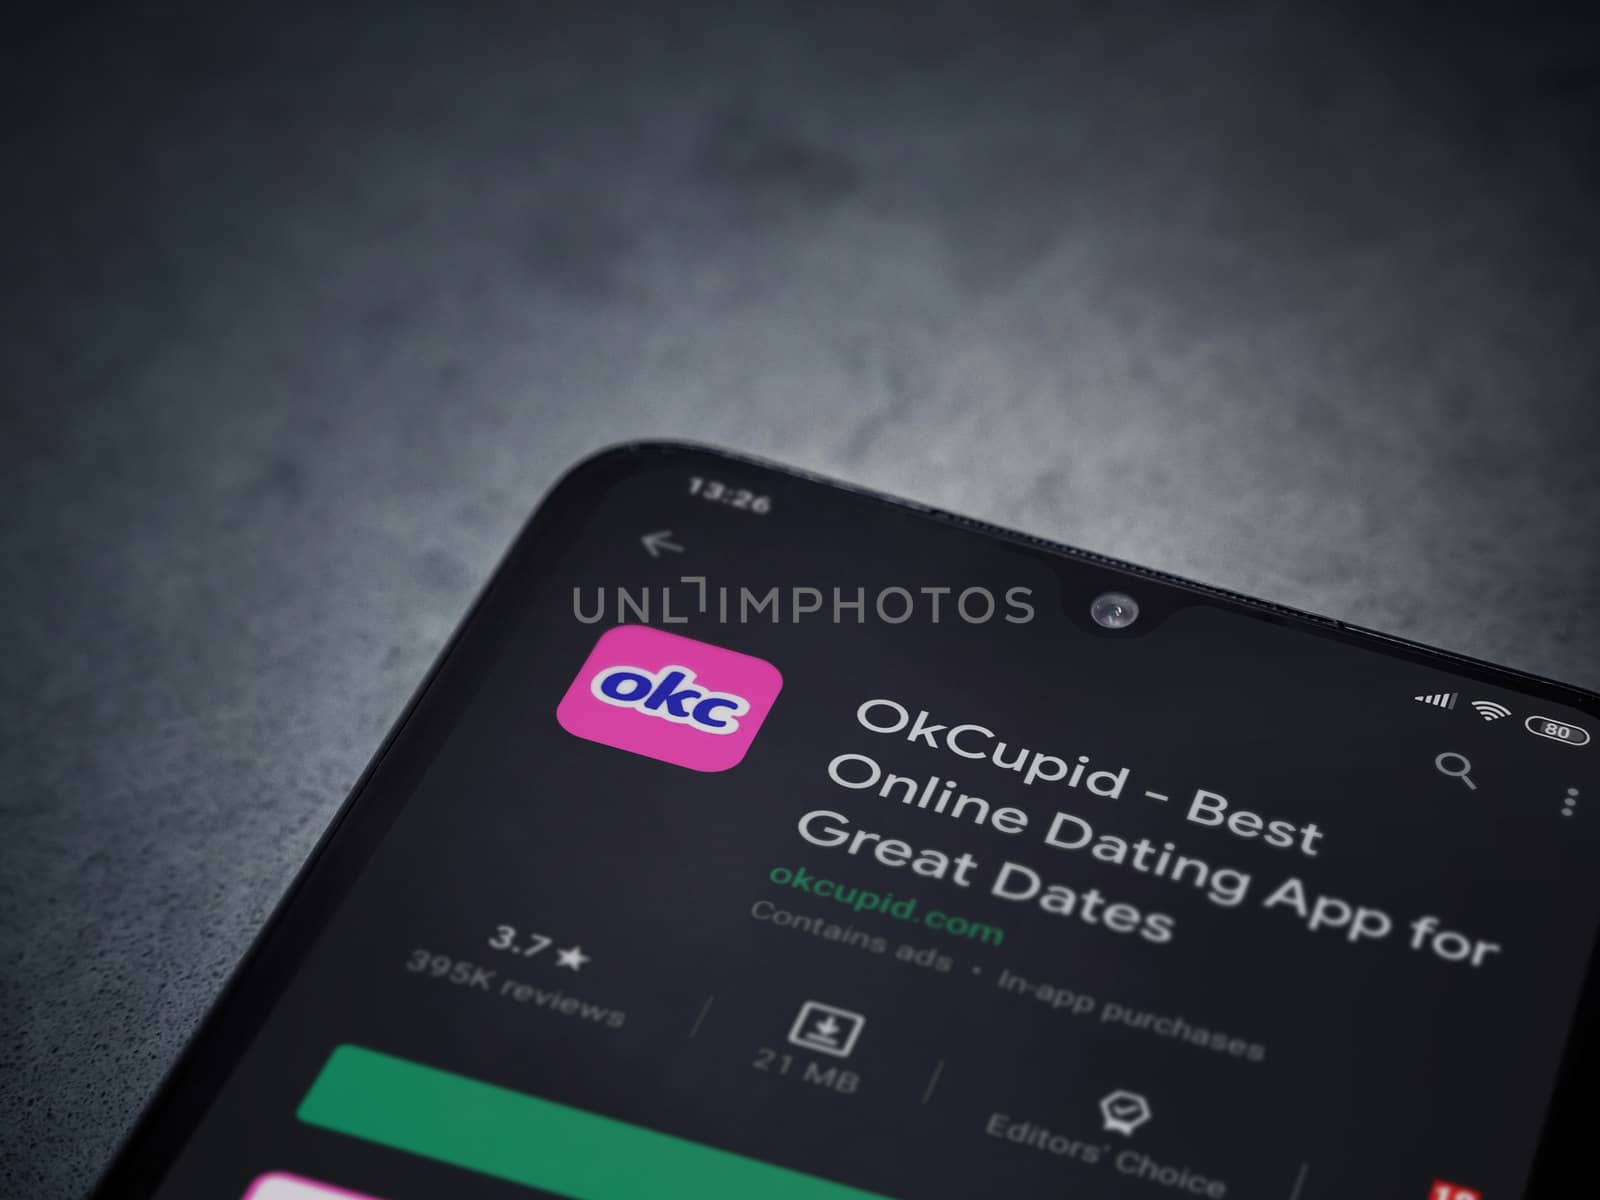 Lod, Israel - July 8, 2020: OkCupid app play store page on the display of a black mobile smartphone on dark marble stone background. Top view flat lay with copy space.